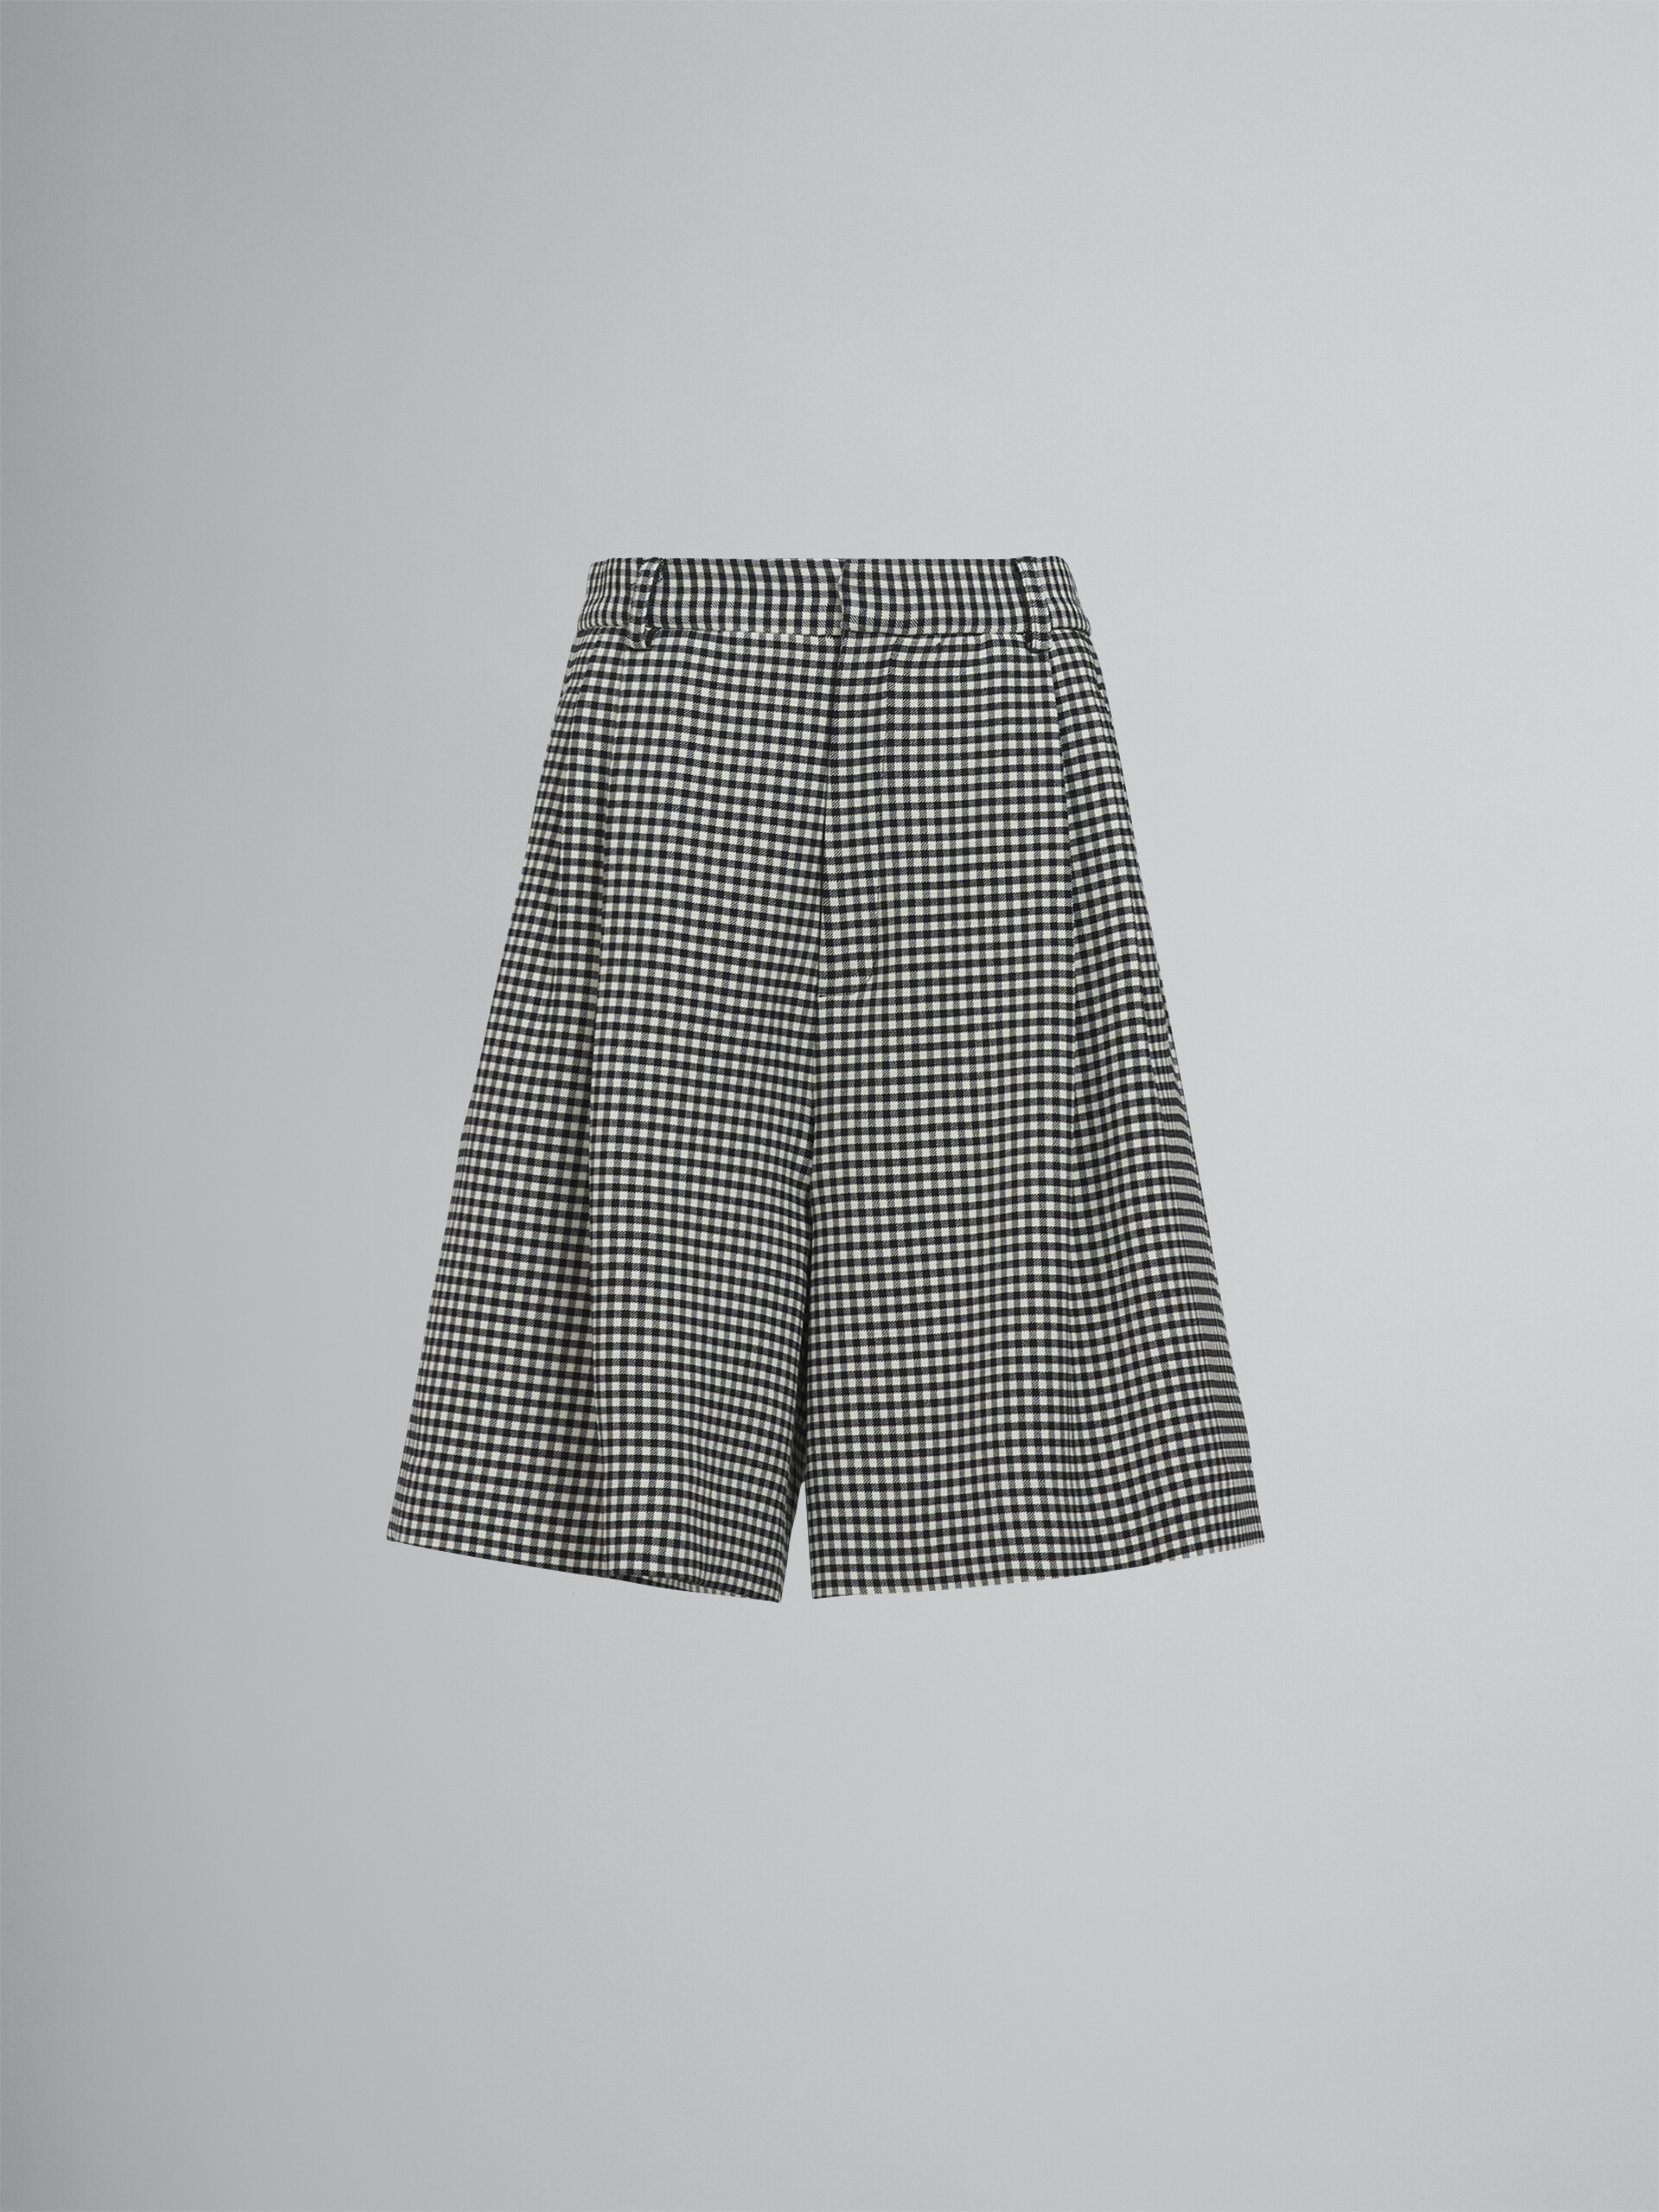 Double-faced houndstooth wool Bermuda shorts - Pants - Image 1